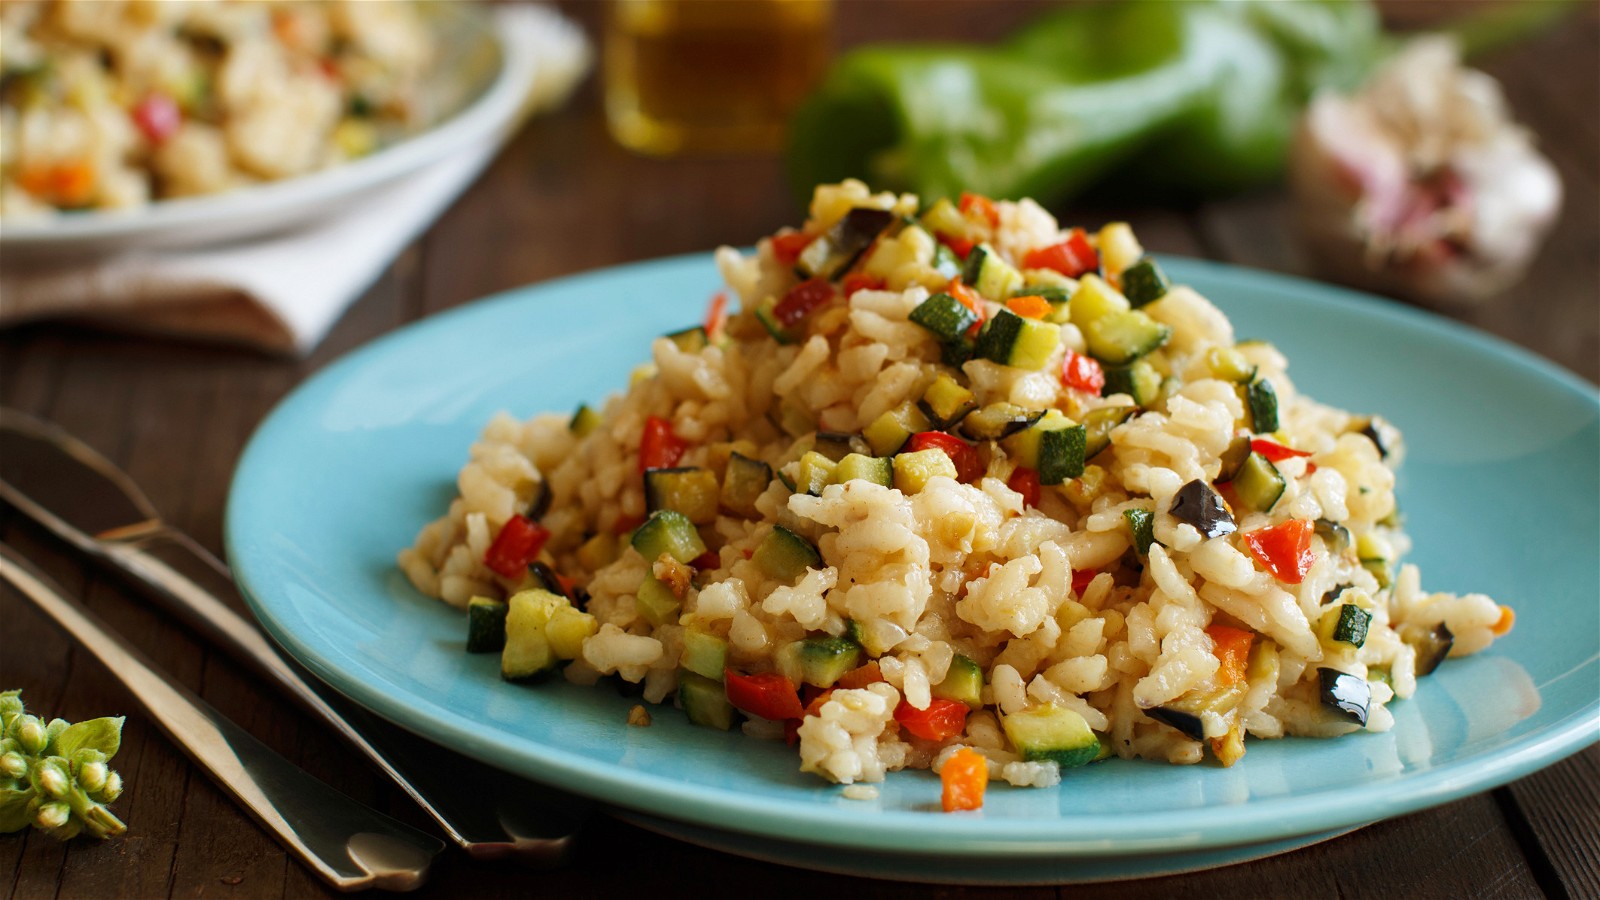 Image of Summer Risotto